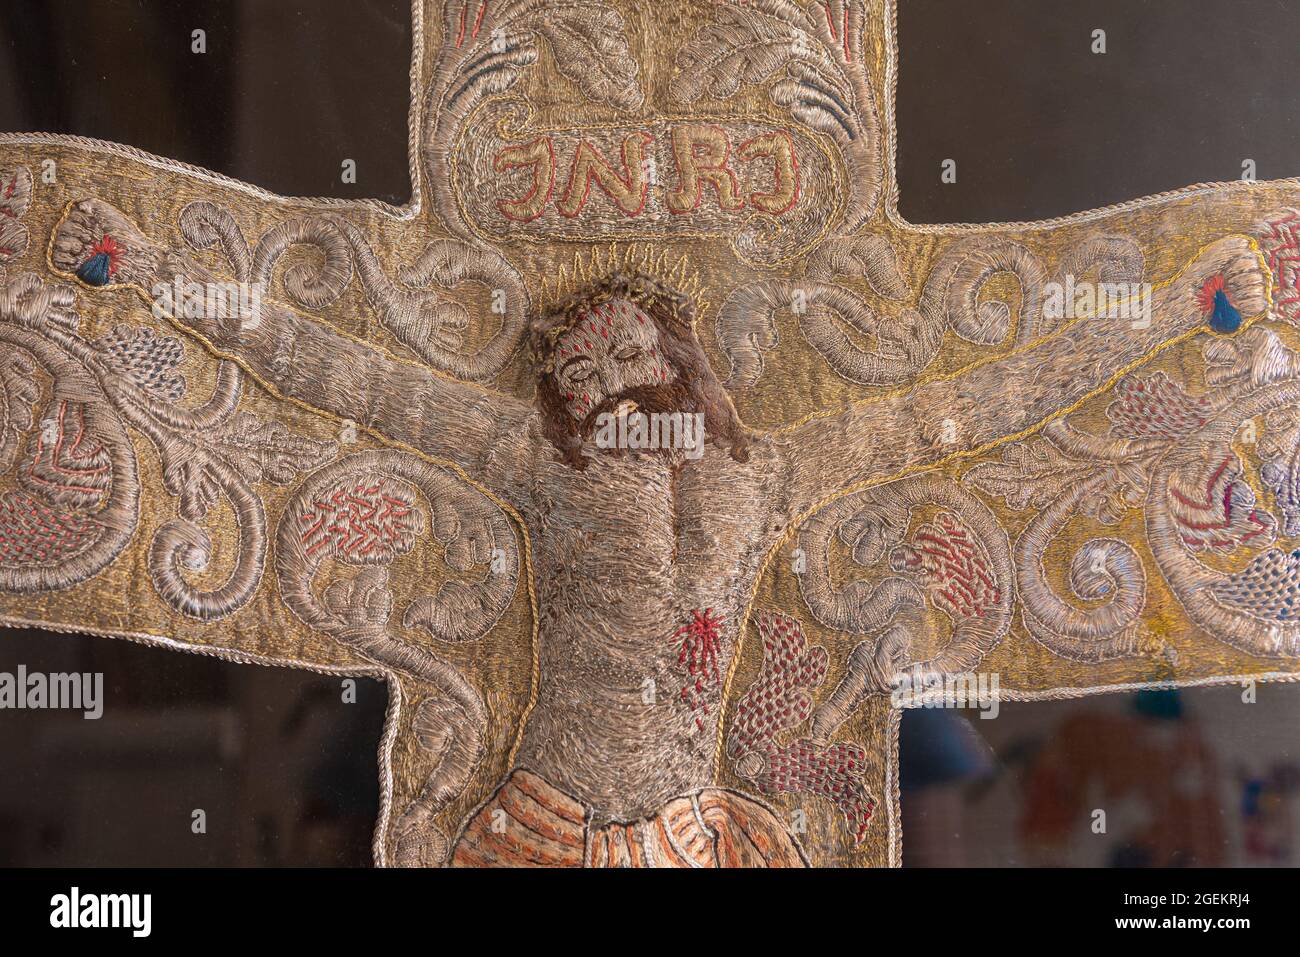 an ancient Embroidery depicting the crucifixion, Stora Köpinge, Sweden, July 16, 2021 Stock Photo